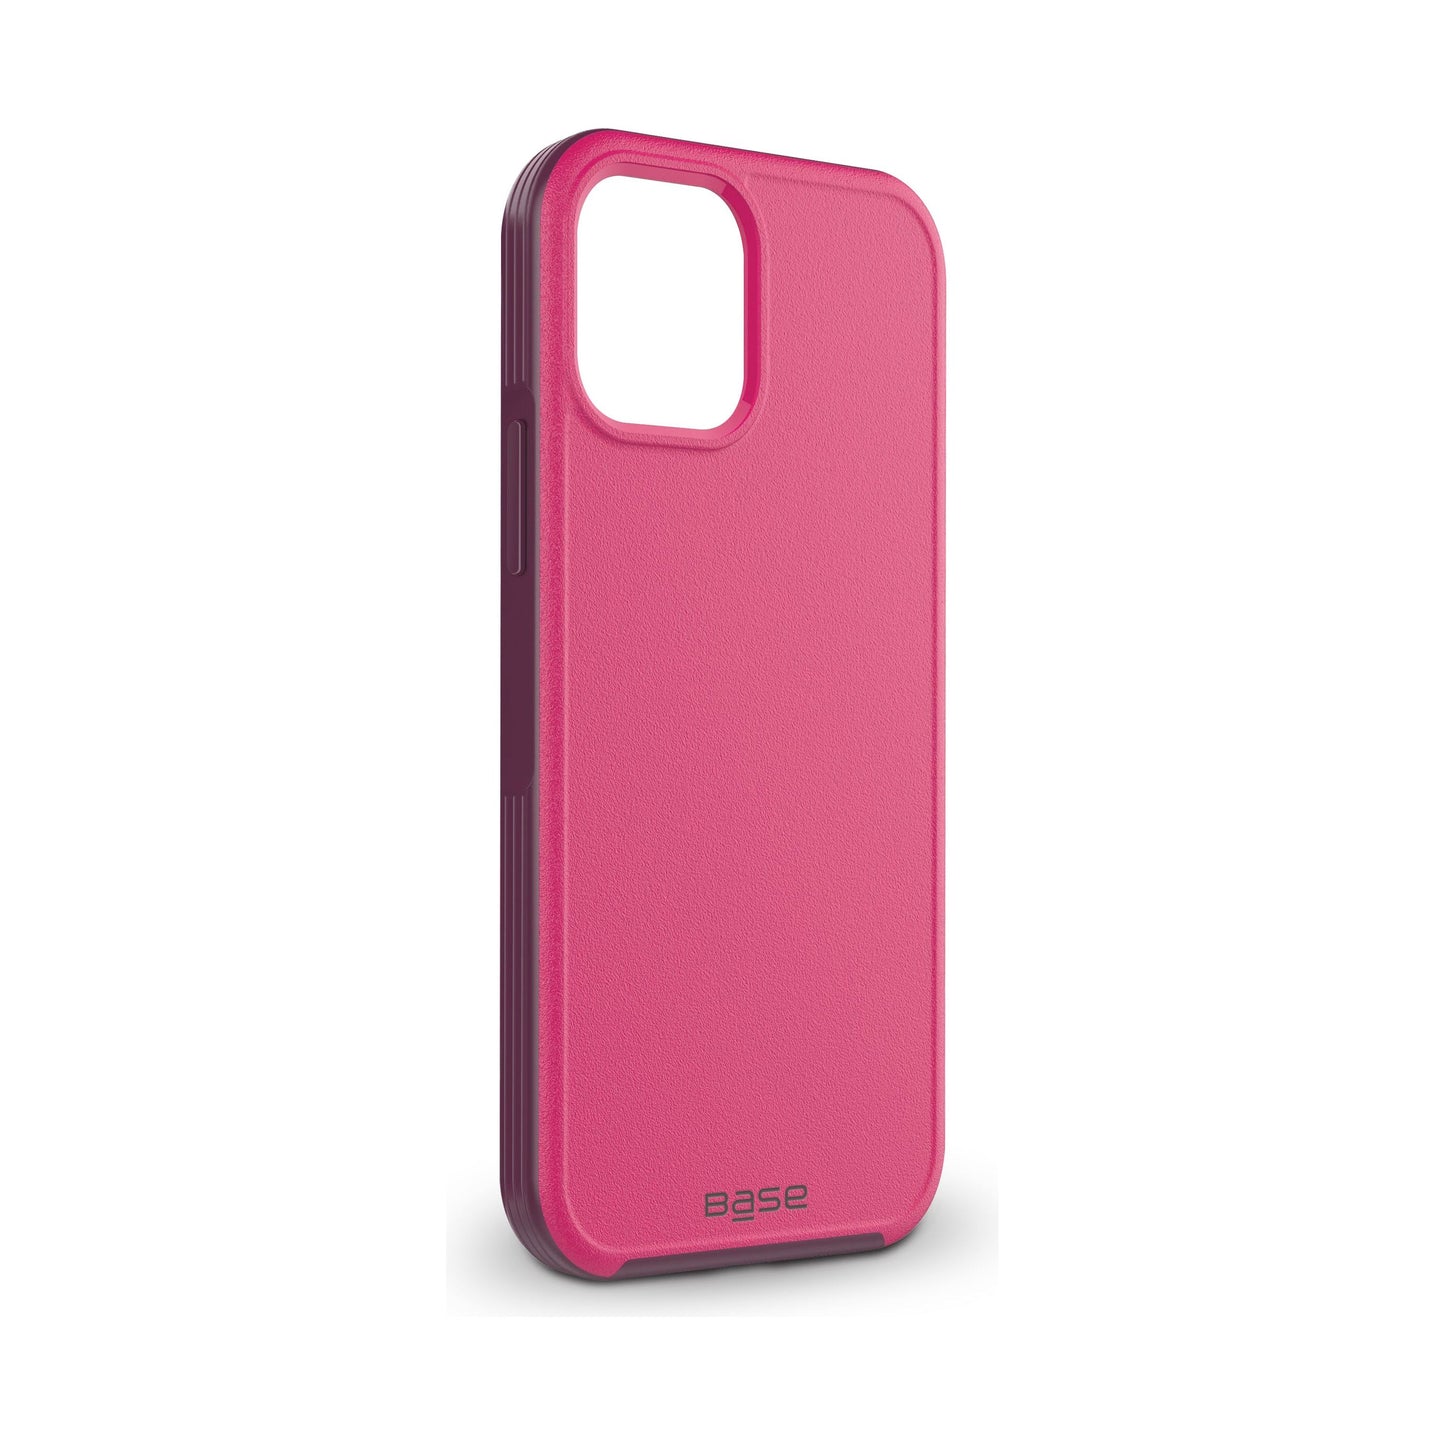 iPhone 13 PRO (6.1) - ProTech - Rugged Armor Protective Case - Pink (LIMITED EDITION)